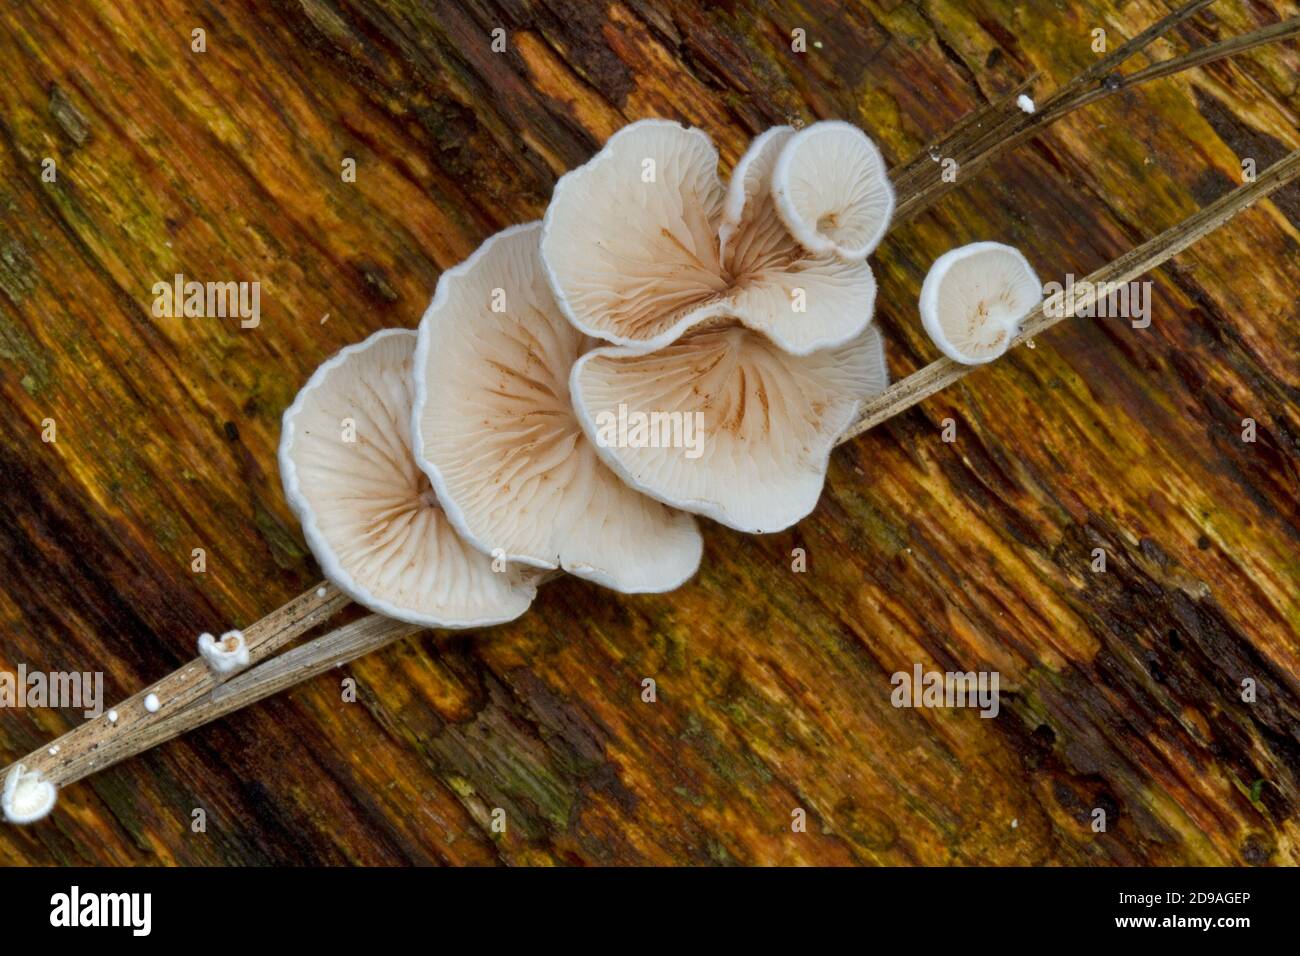 Tiny mushroom, a Variable Oysterling, Crepidotus variabilis, growing on a dead blade of grass Stock Photo